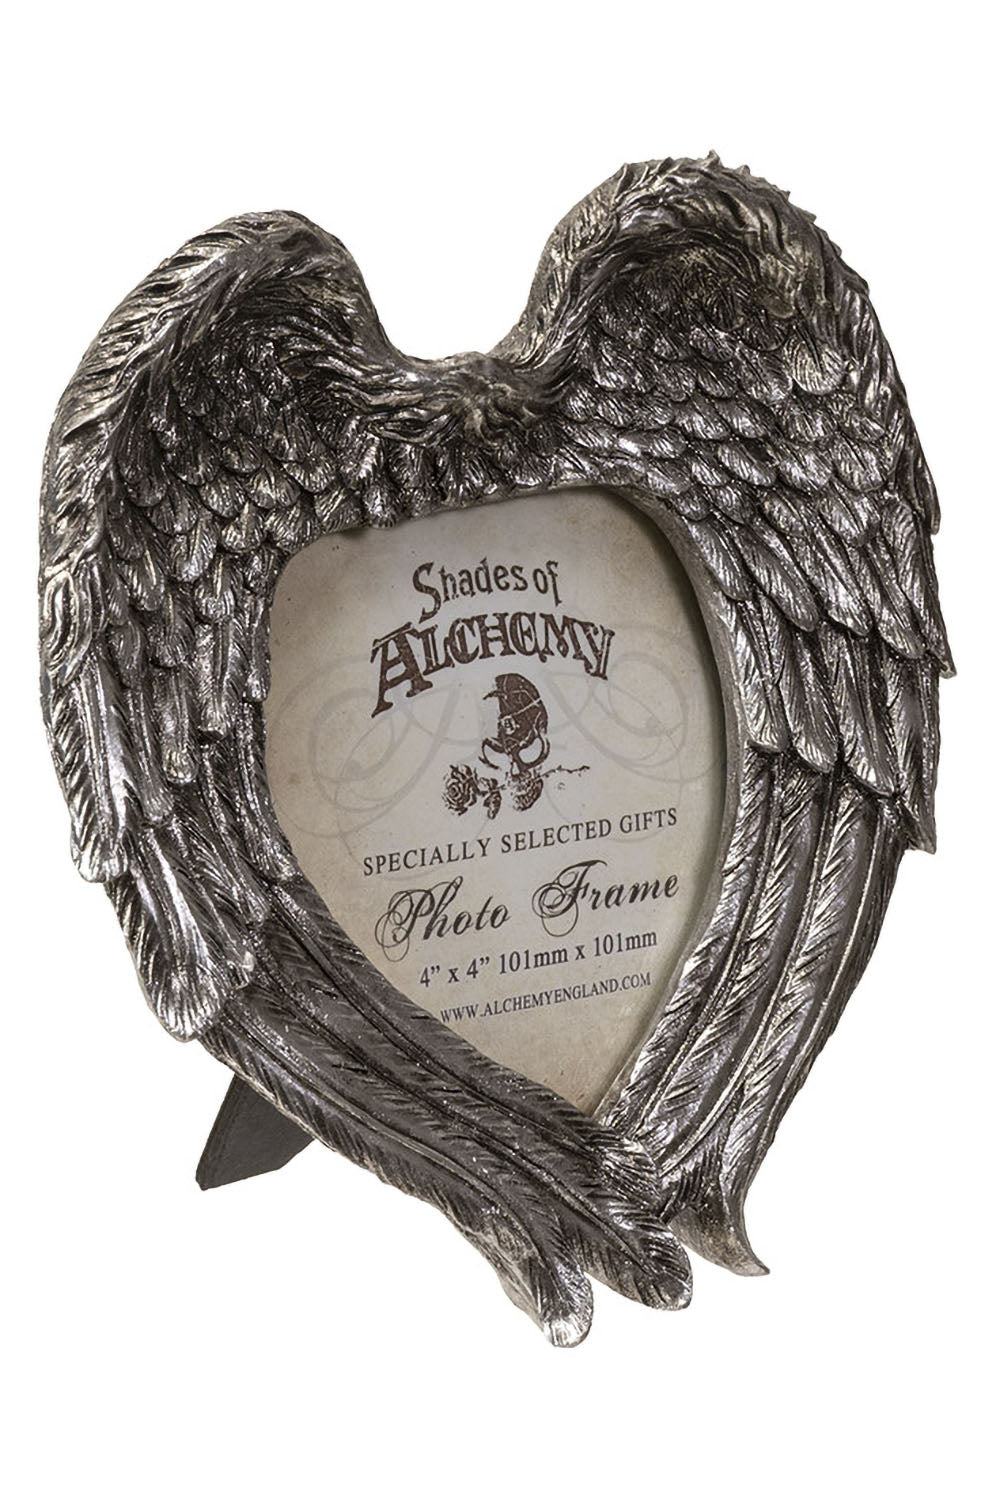 Winged Heart Picture Frame